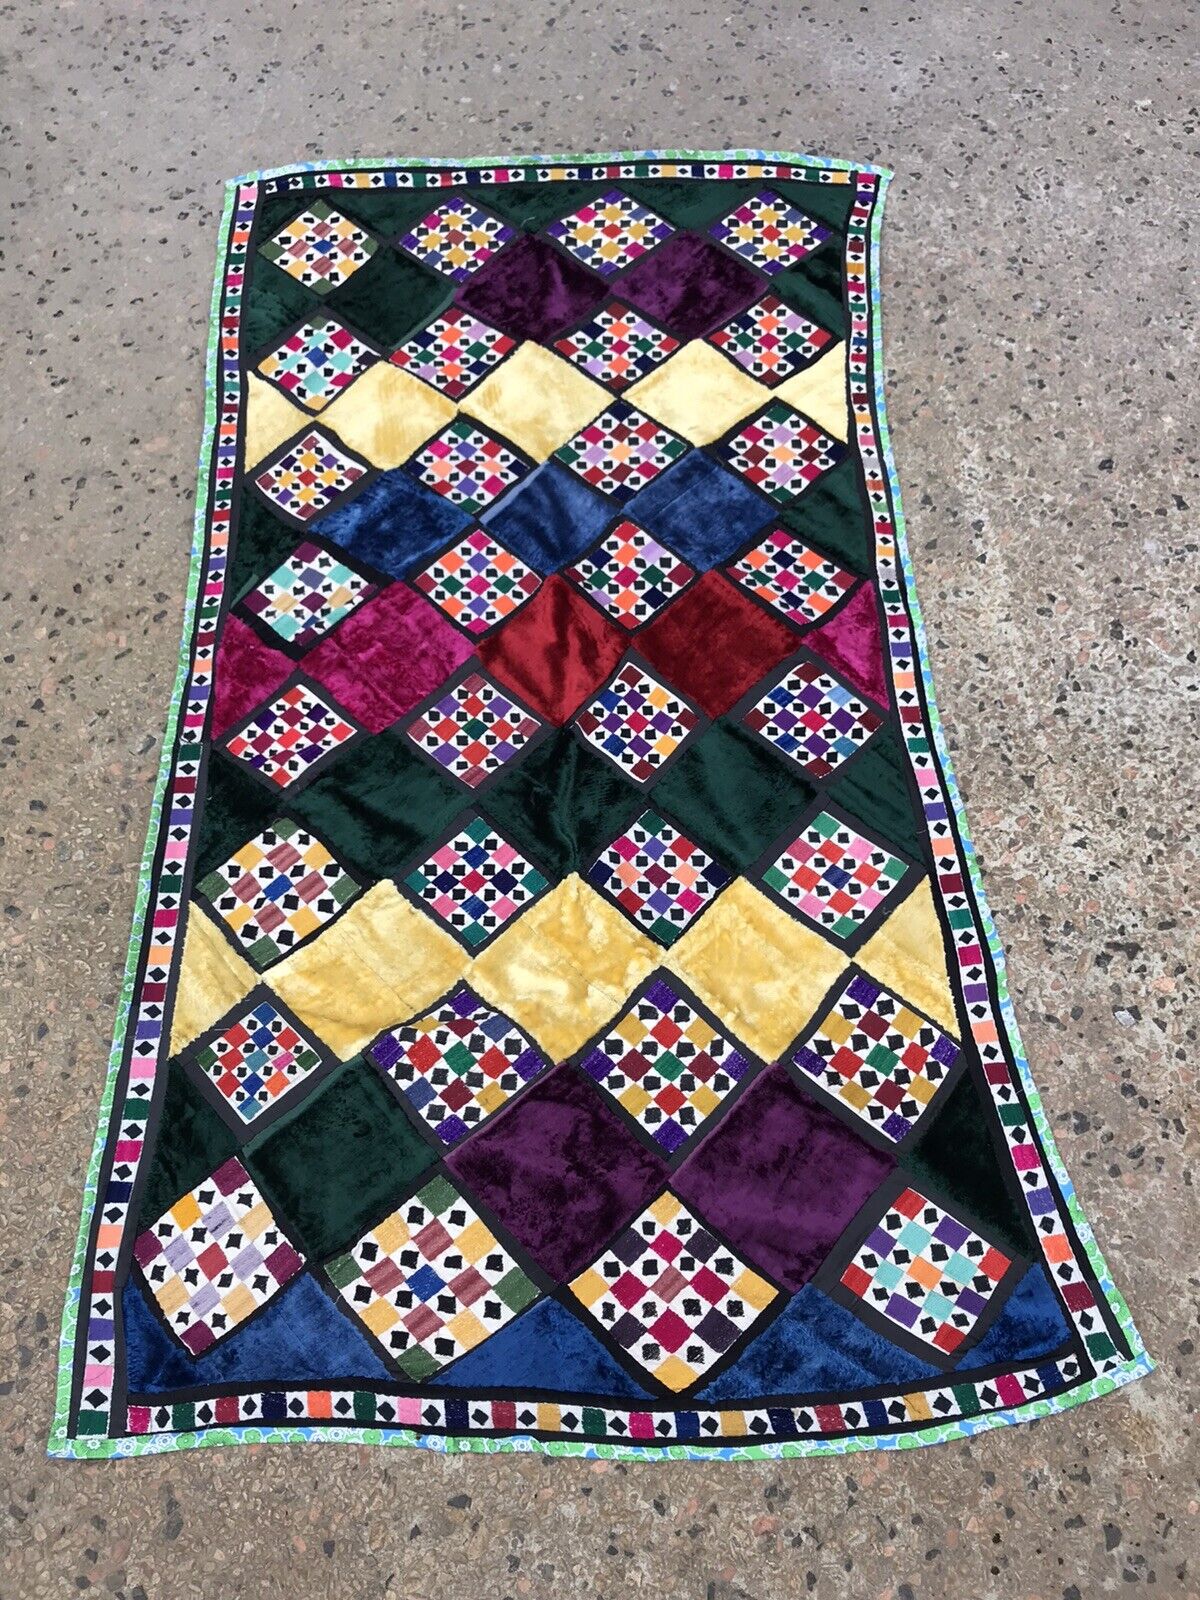 Vintage Uzbek embroidery patchwork suzani, handmade tablecover, wall Hanging